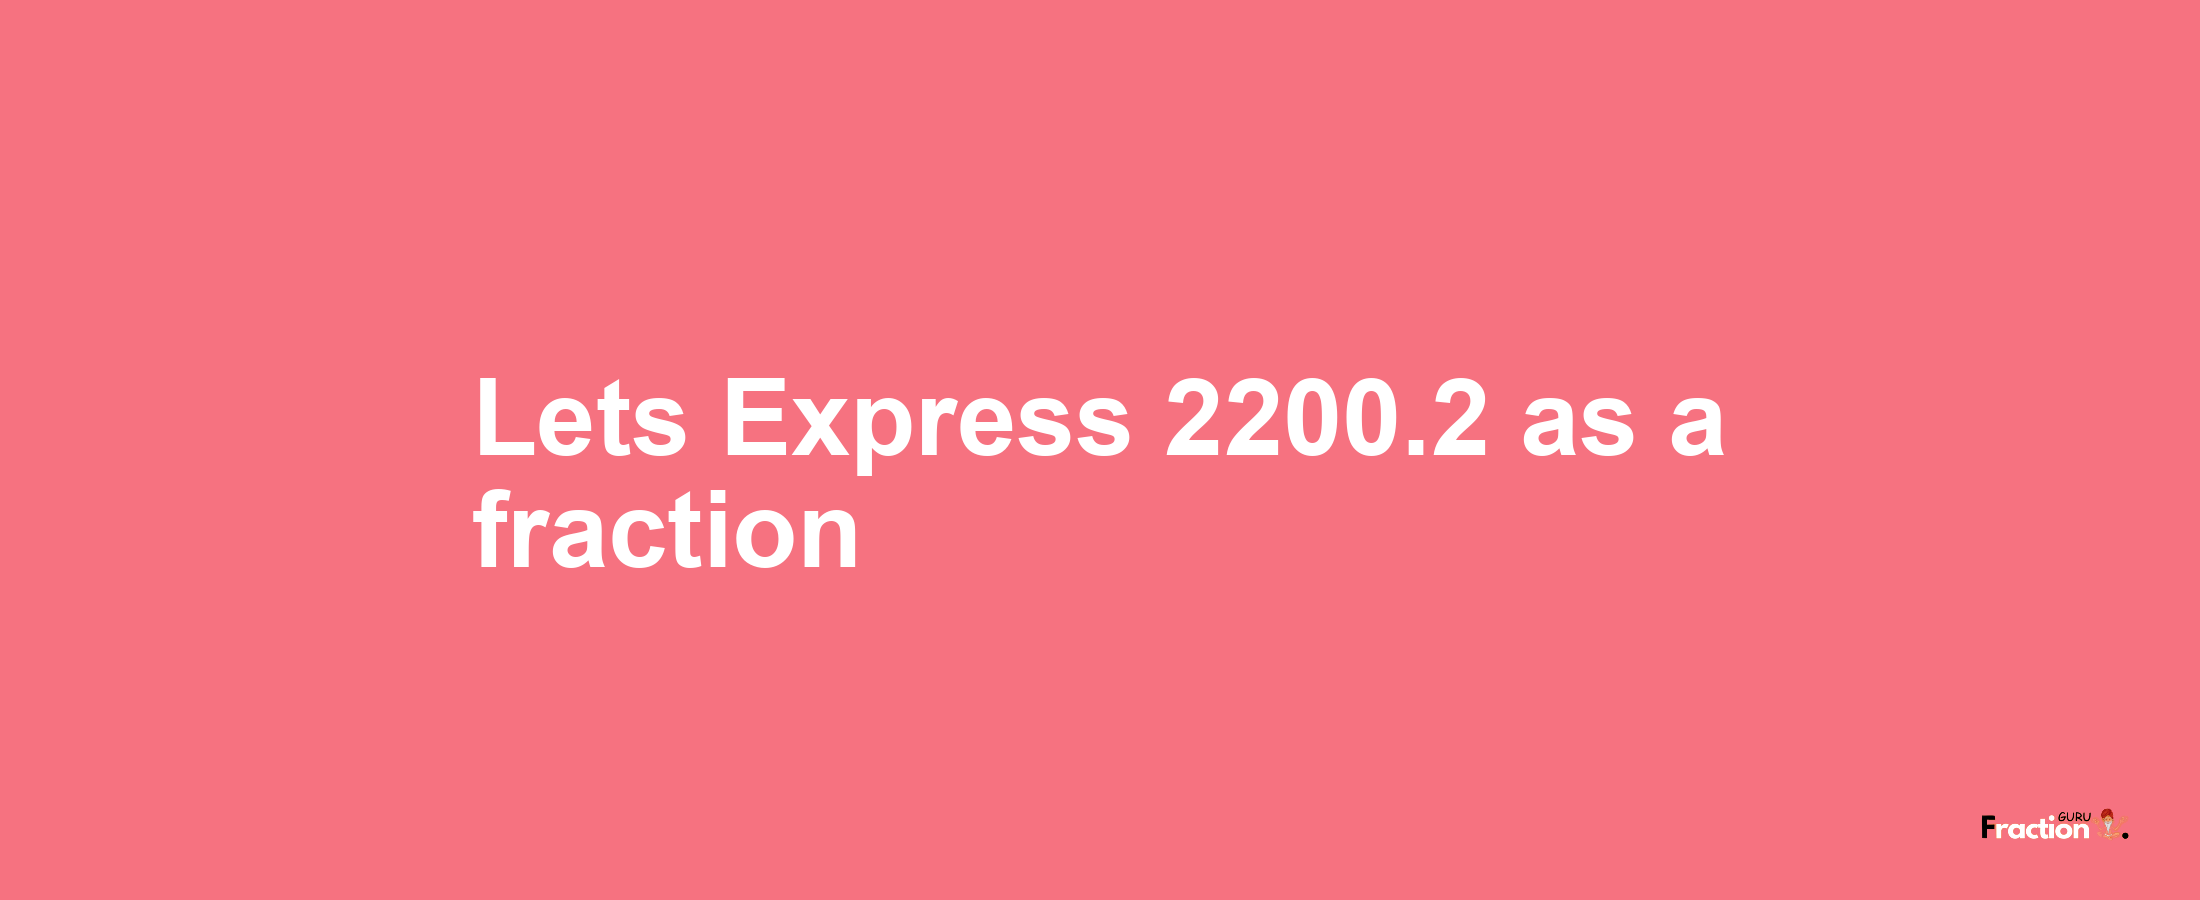 Lets Express 2200.2 as afraction